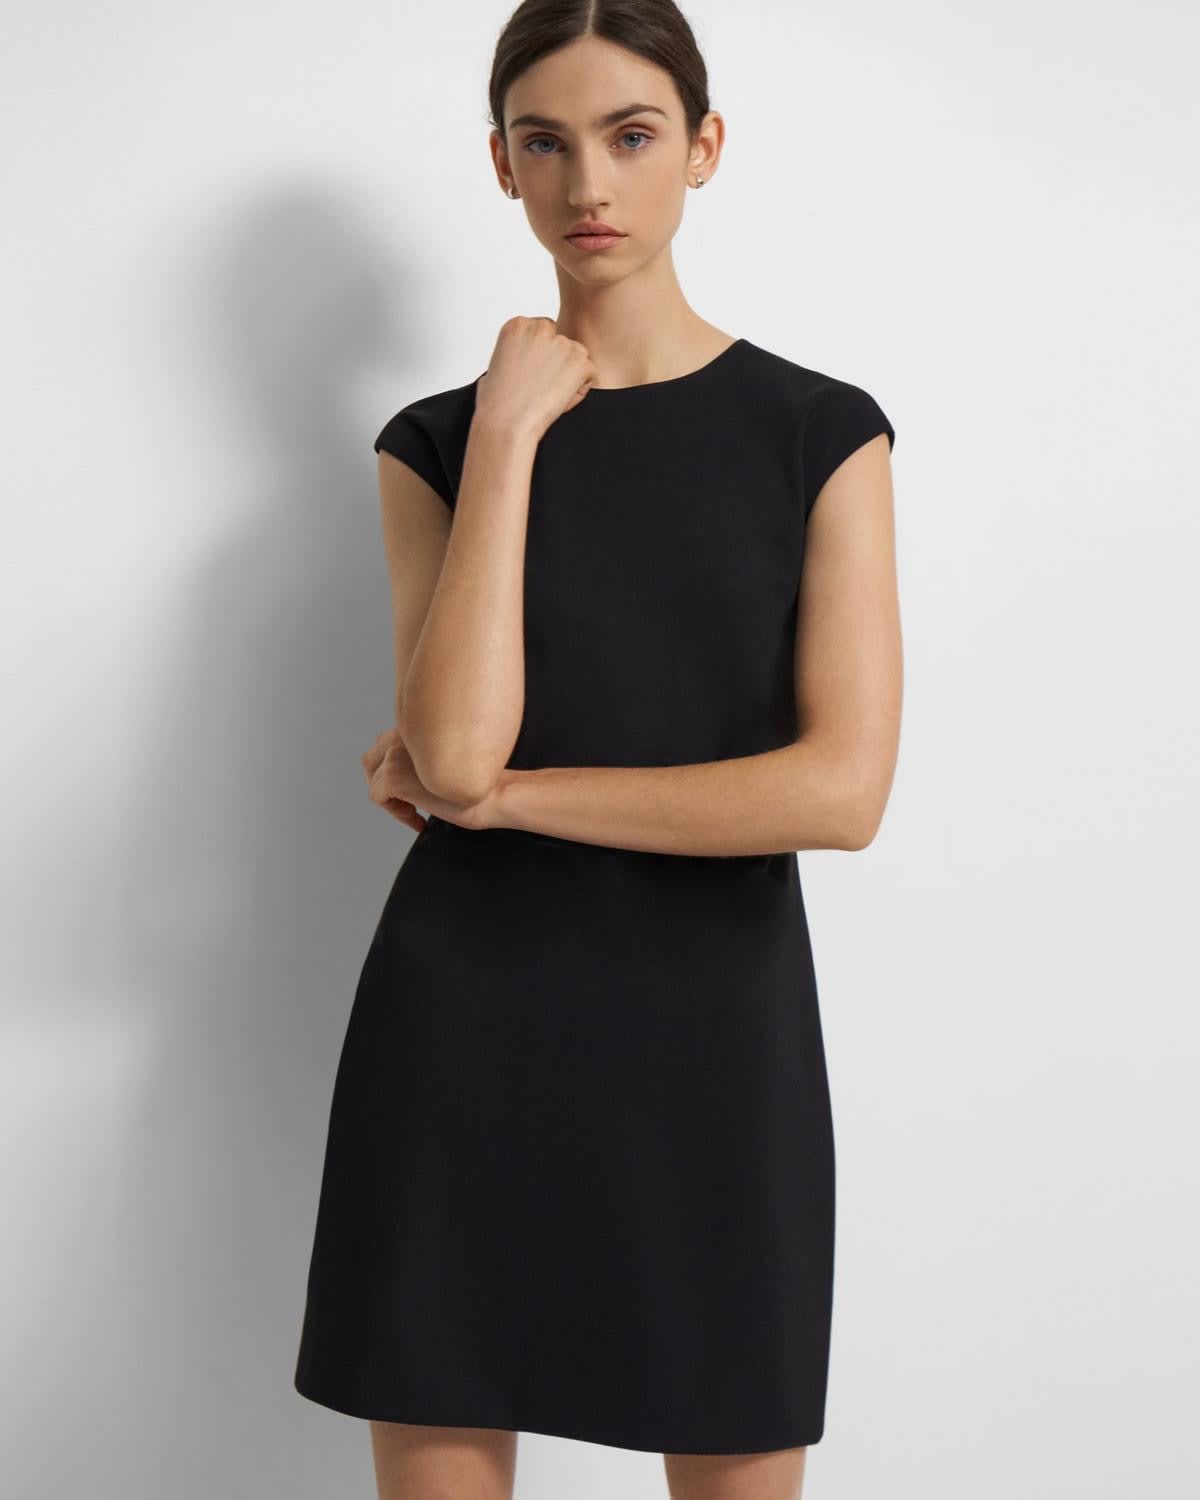 29 best little black dresses to wear for every occasion - TODAY